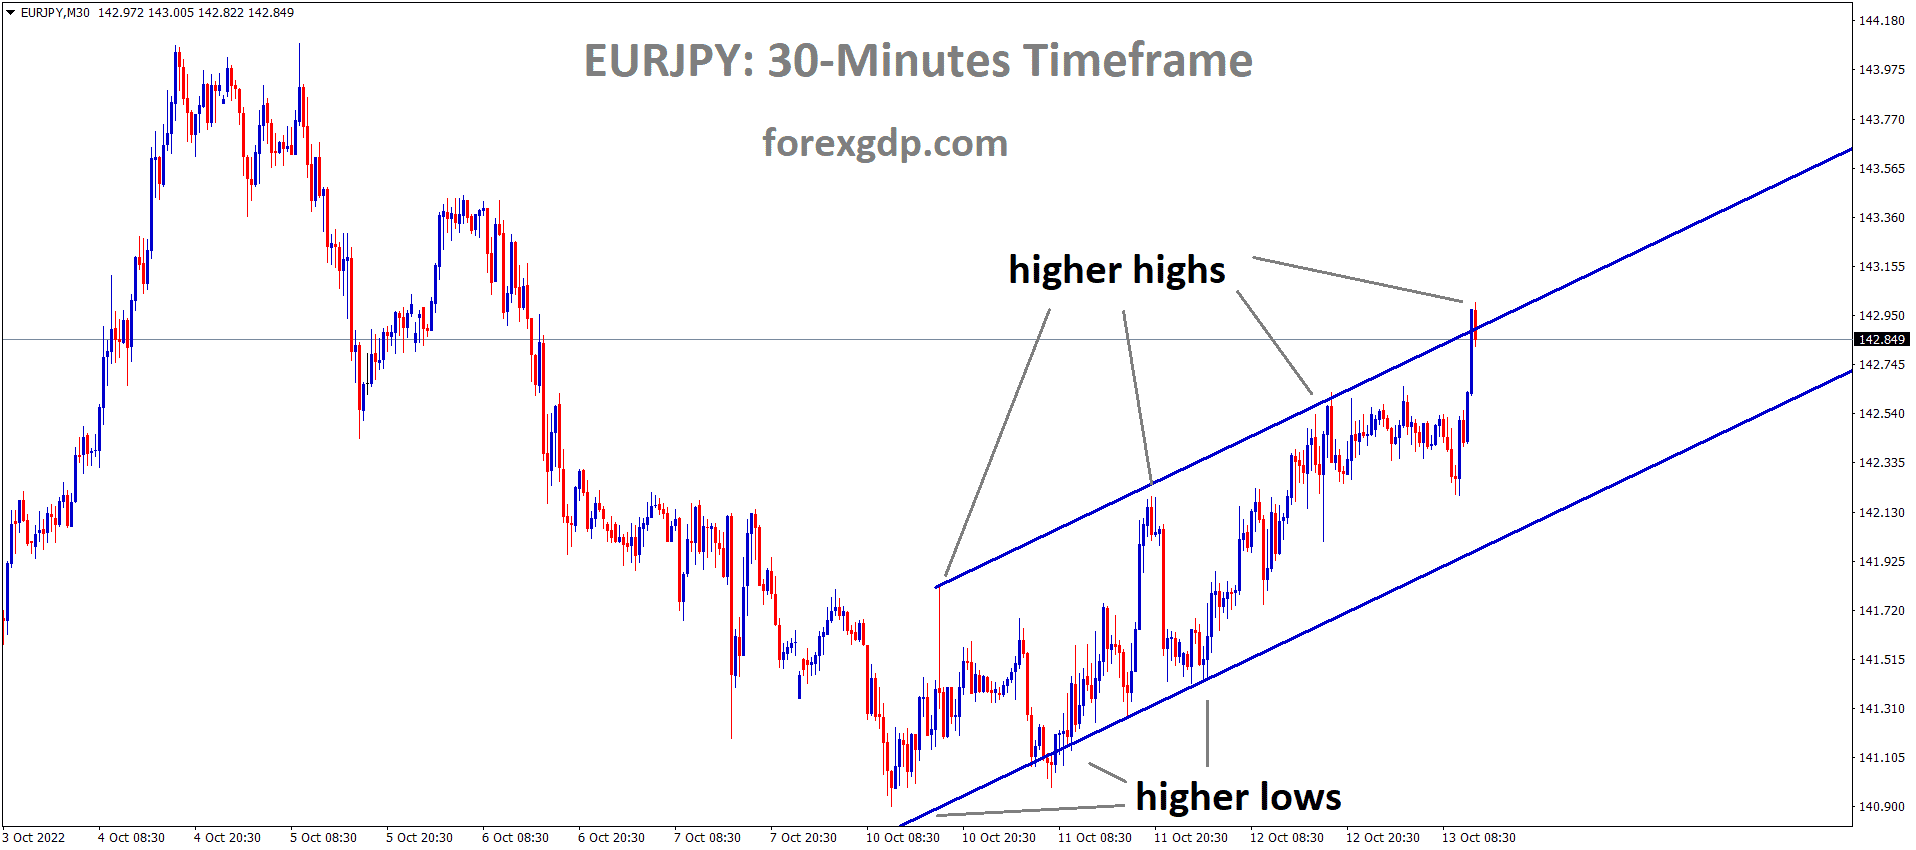 EURJPY is moving in an Ascending channel and the market has reached the higher high area of the channel